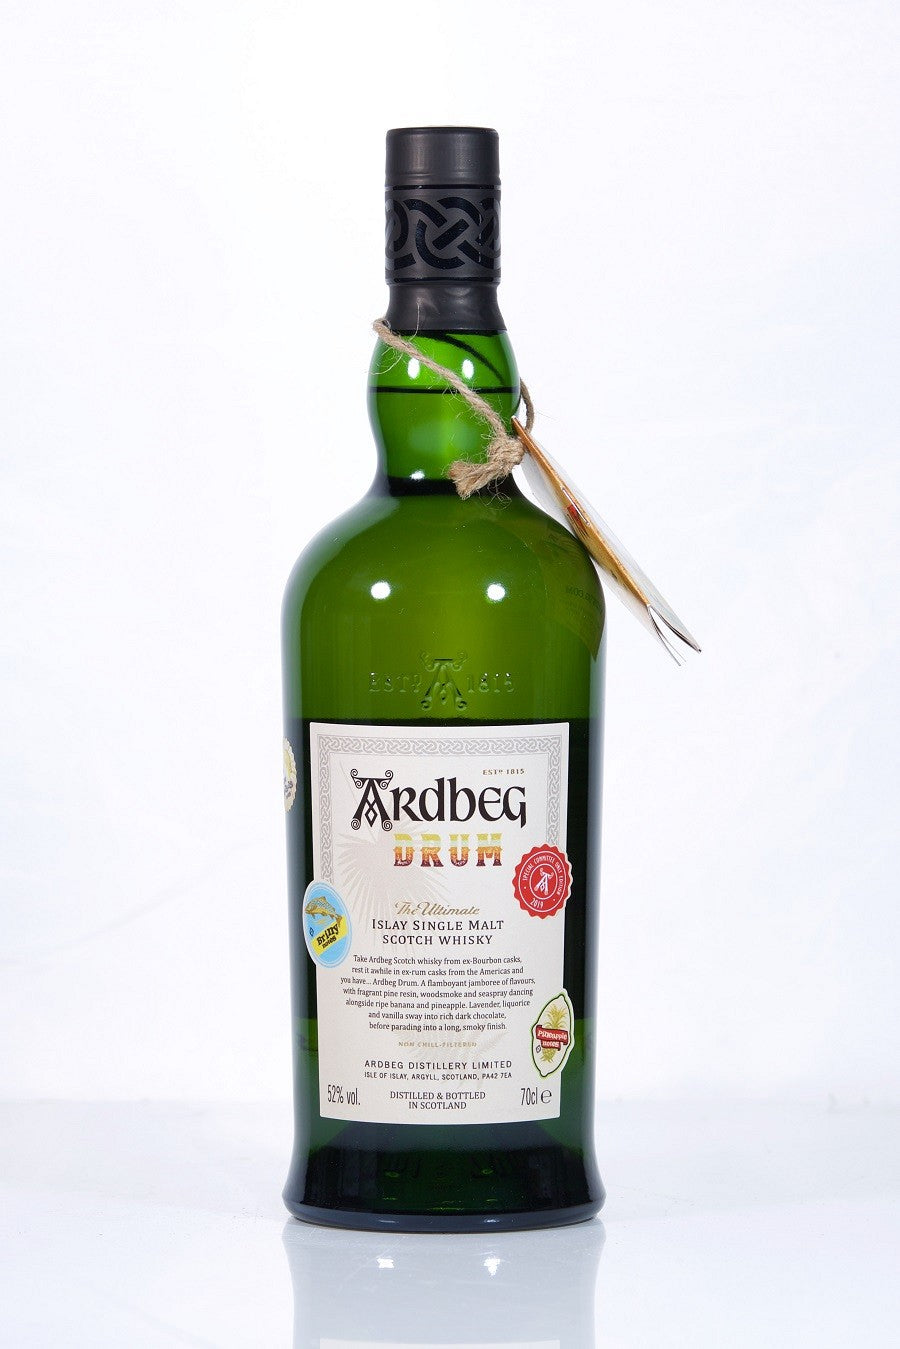 ardbeg drum committee release | scotch whisky